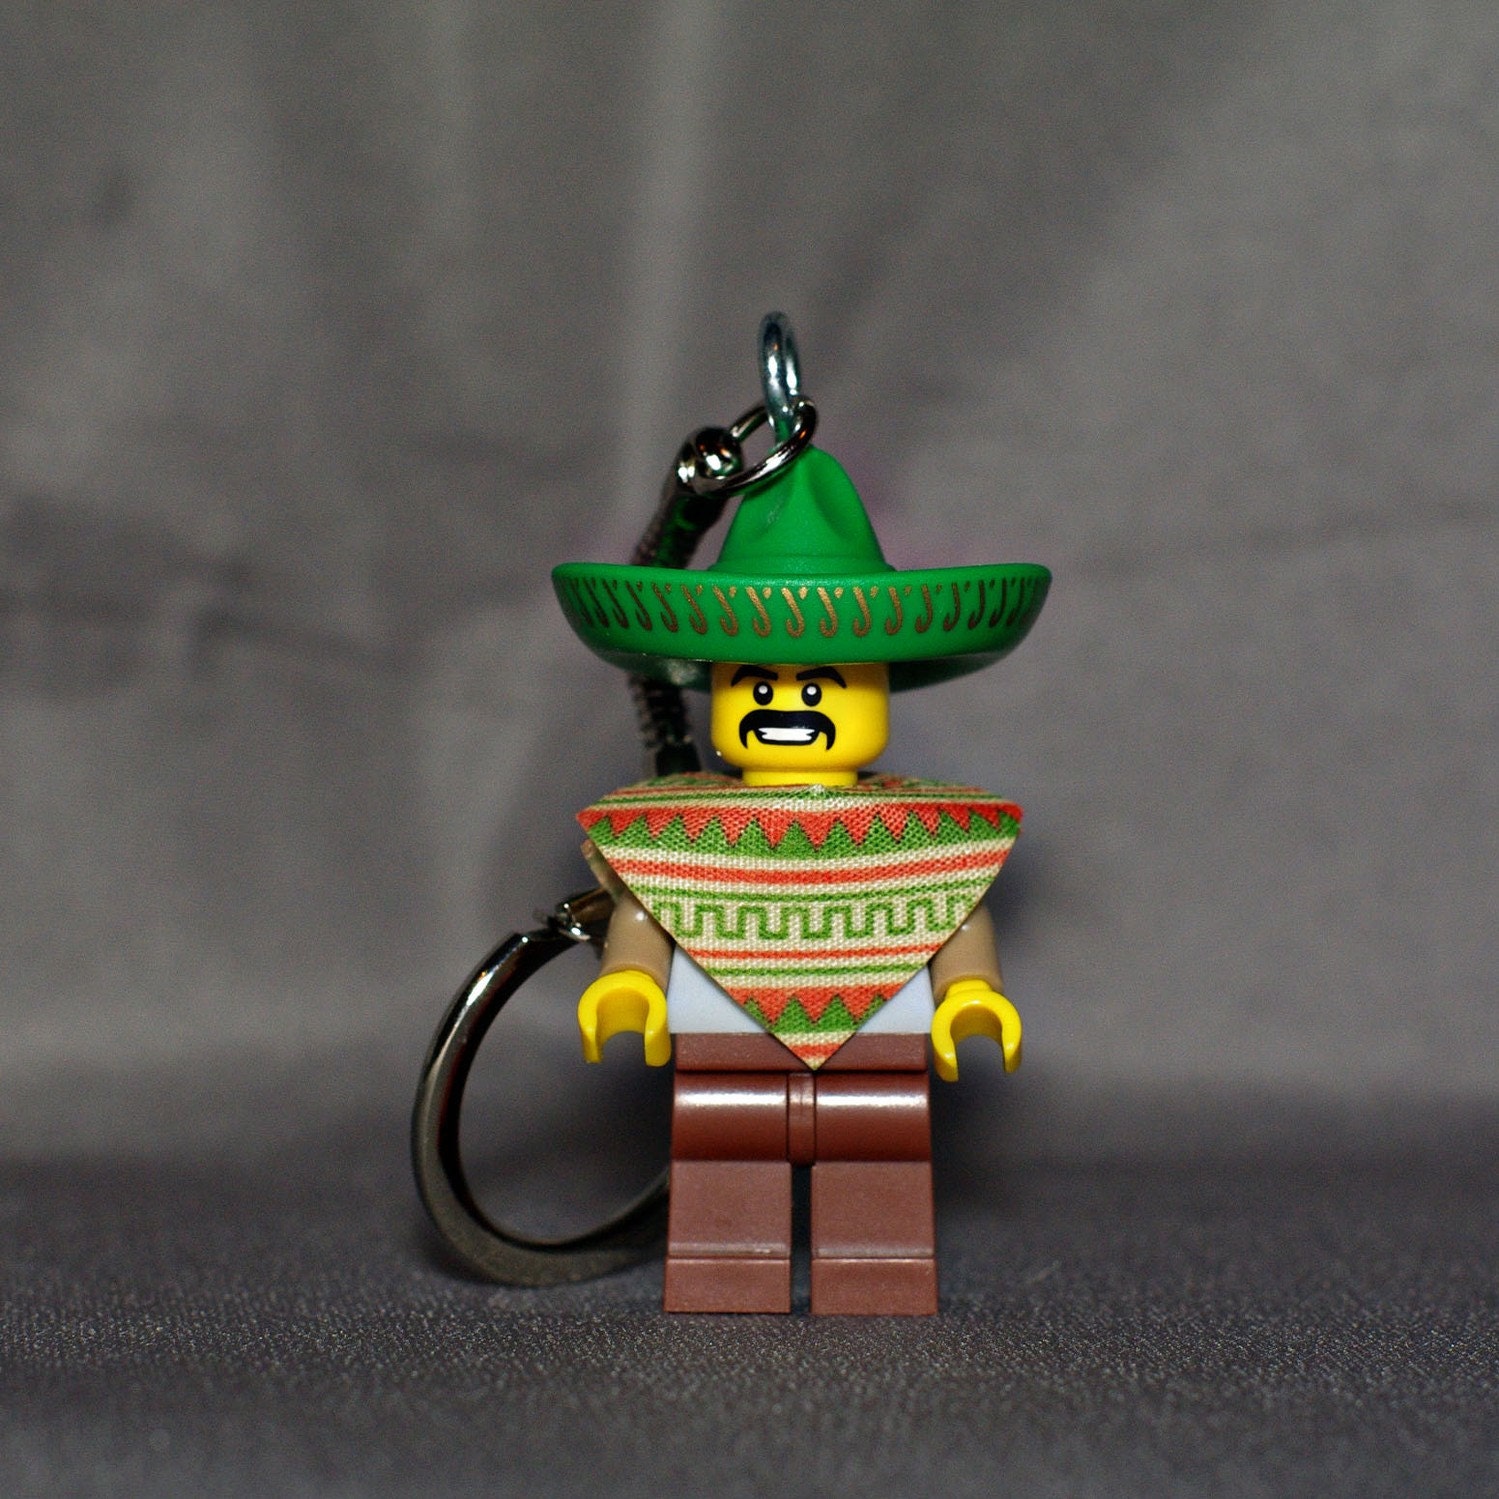 Mexican Hombre Lego key chain